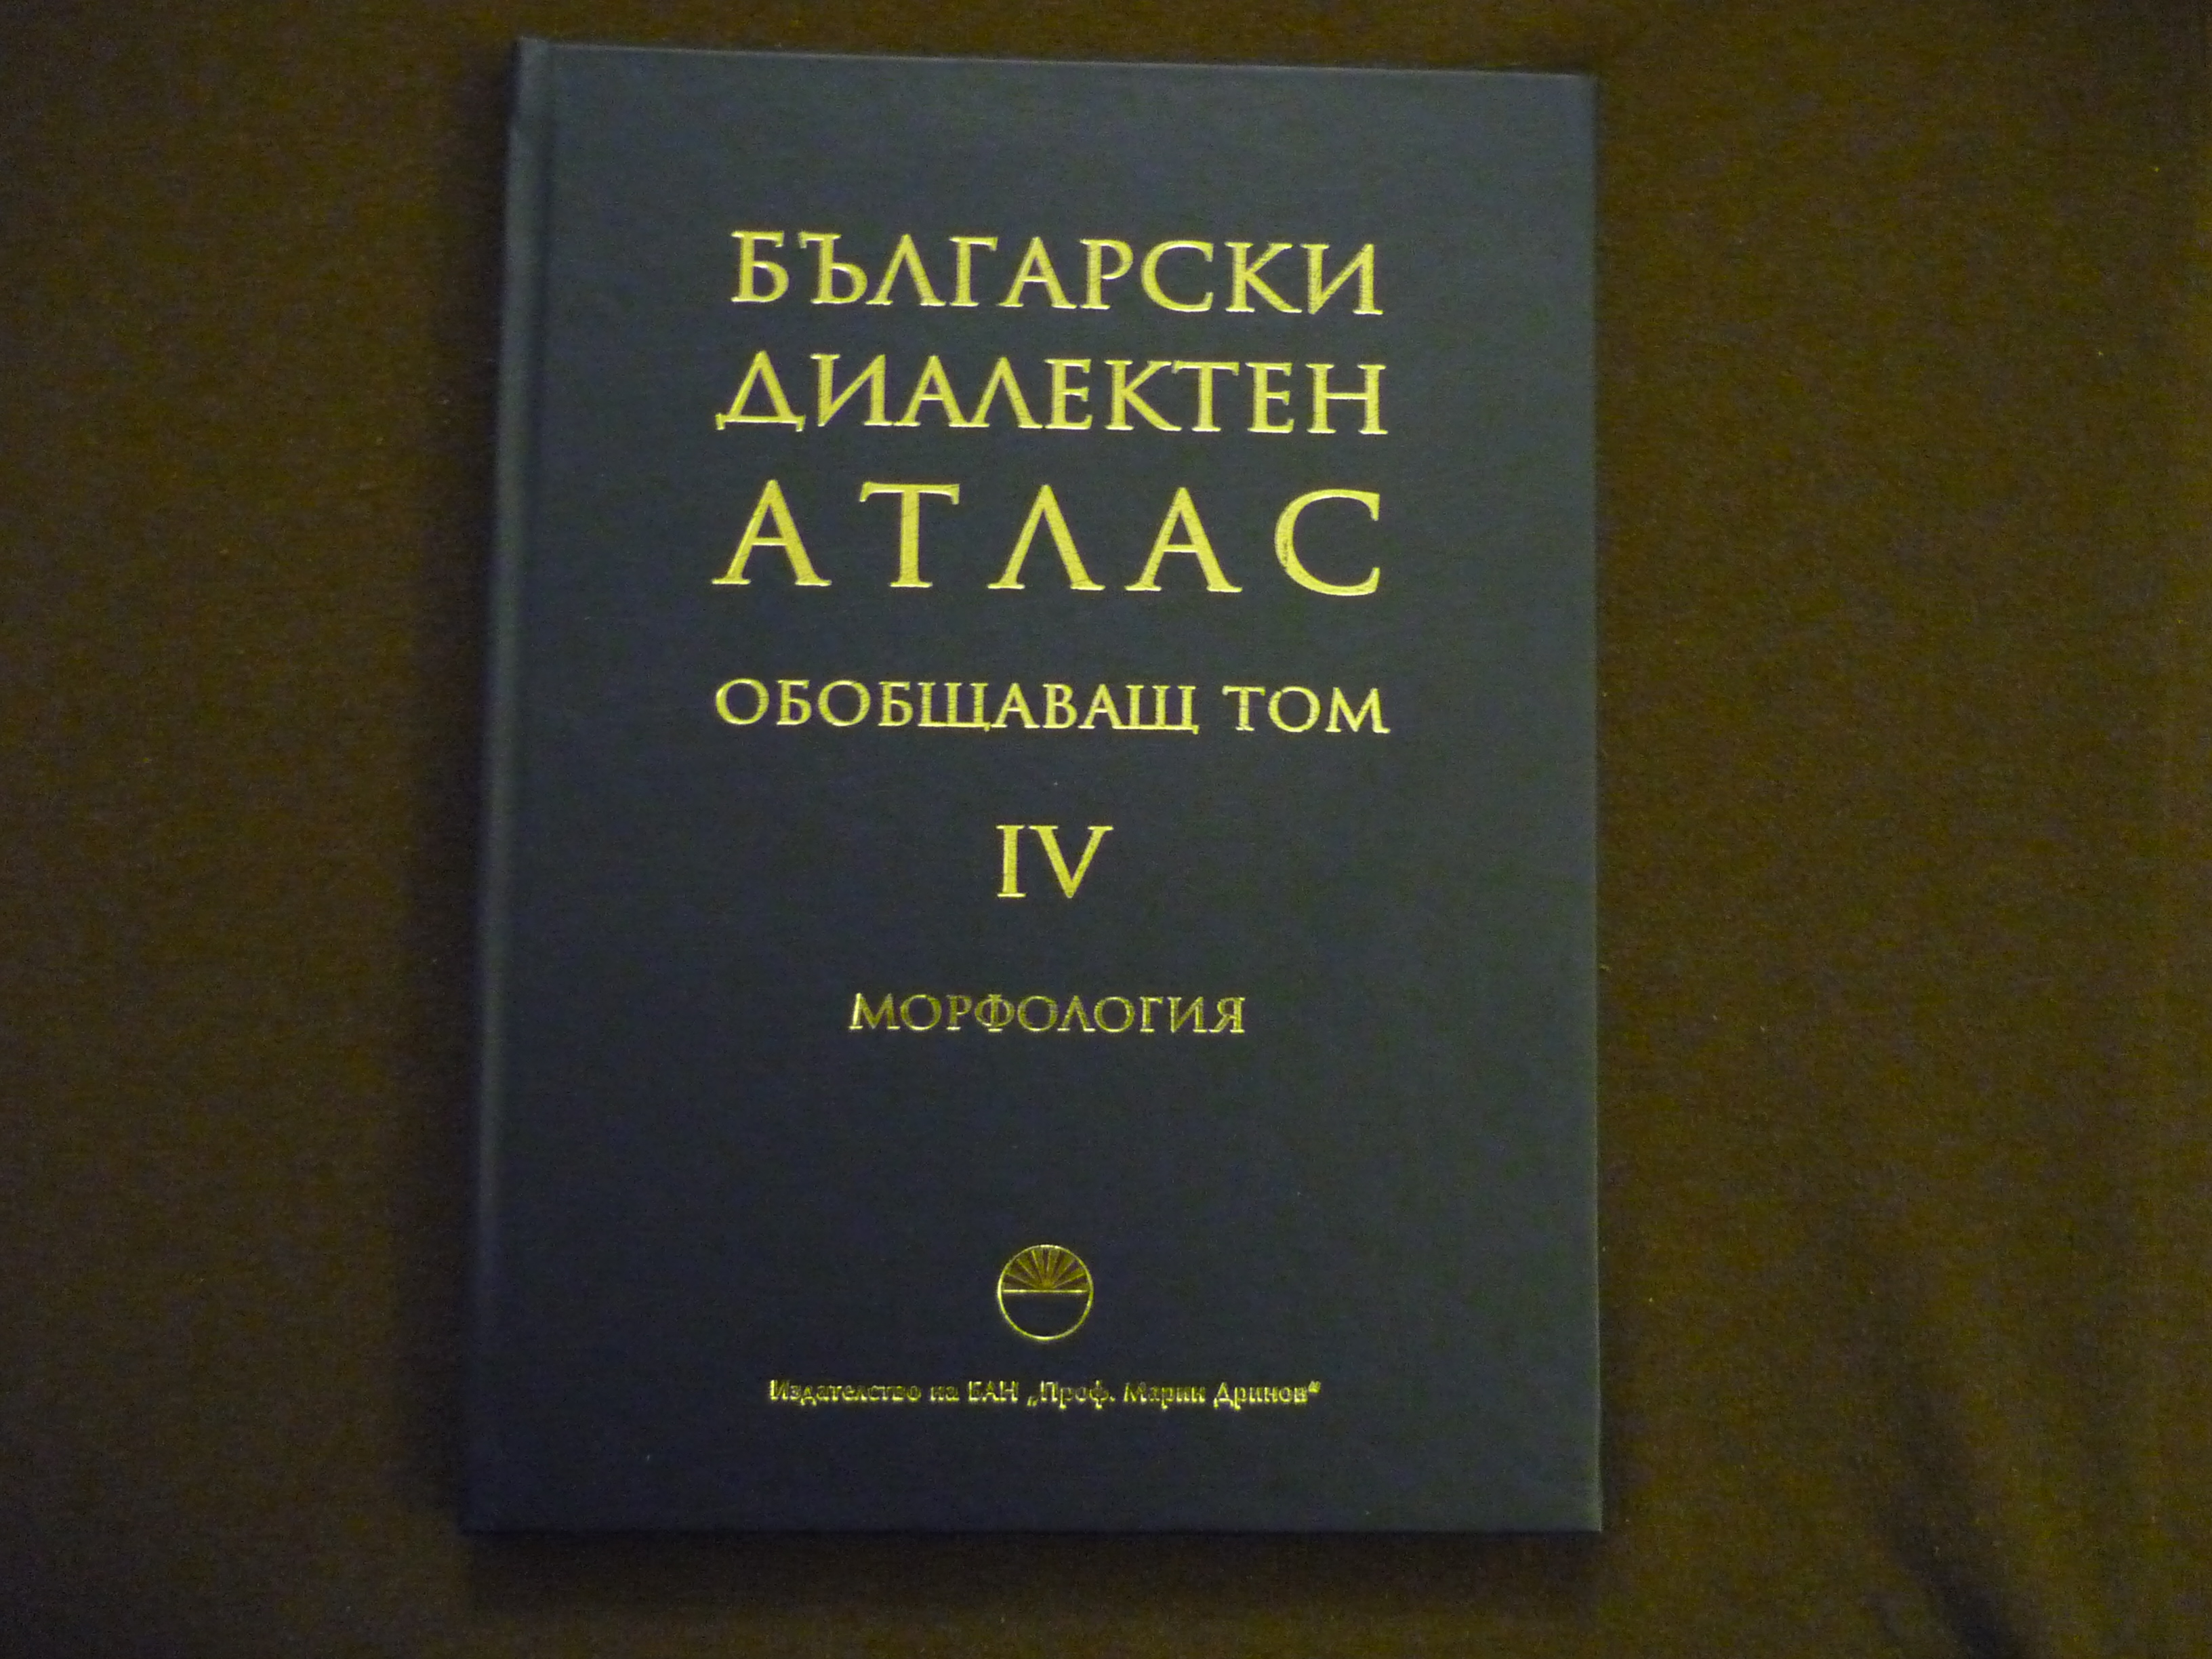 Bulgarian Dialect Atlas. Overview. Volume 4. Morphology